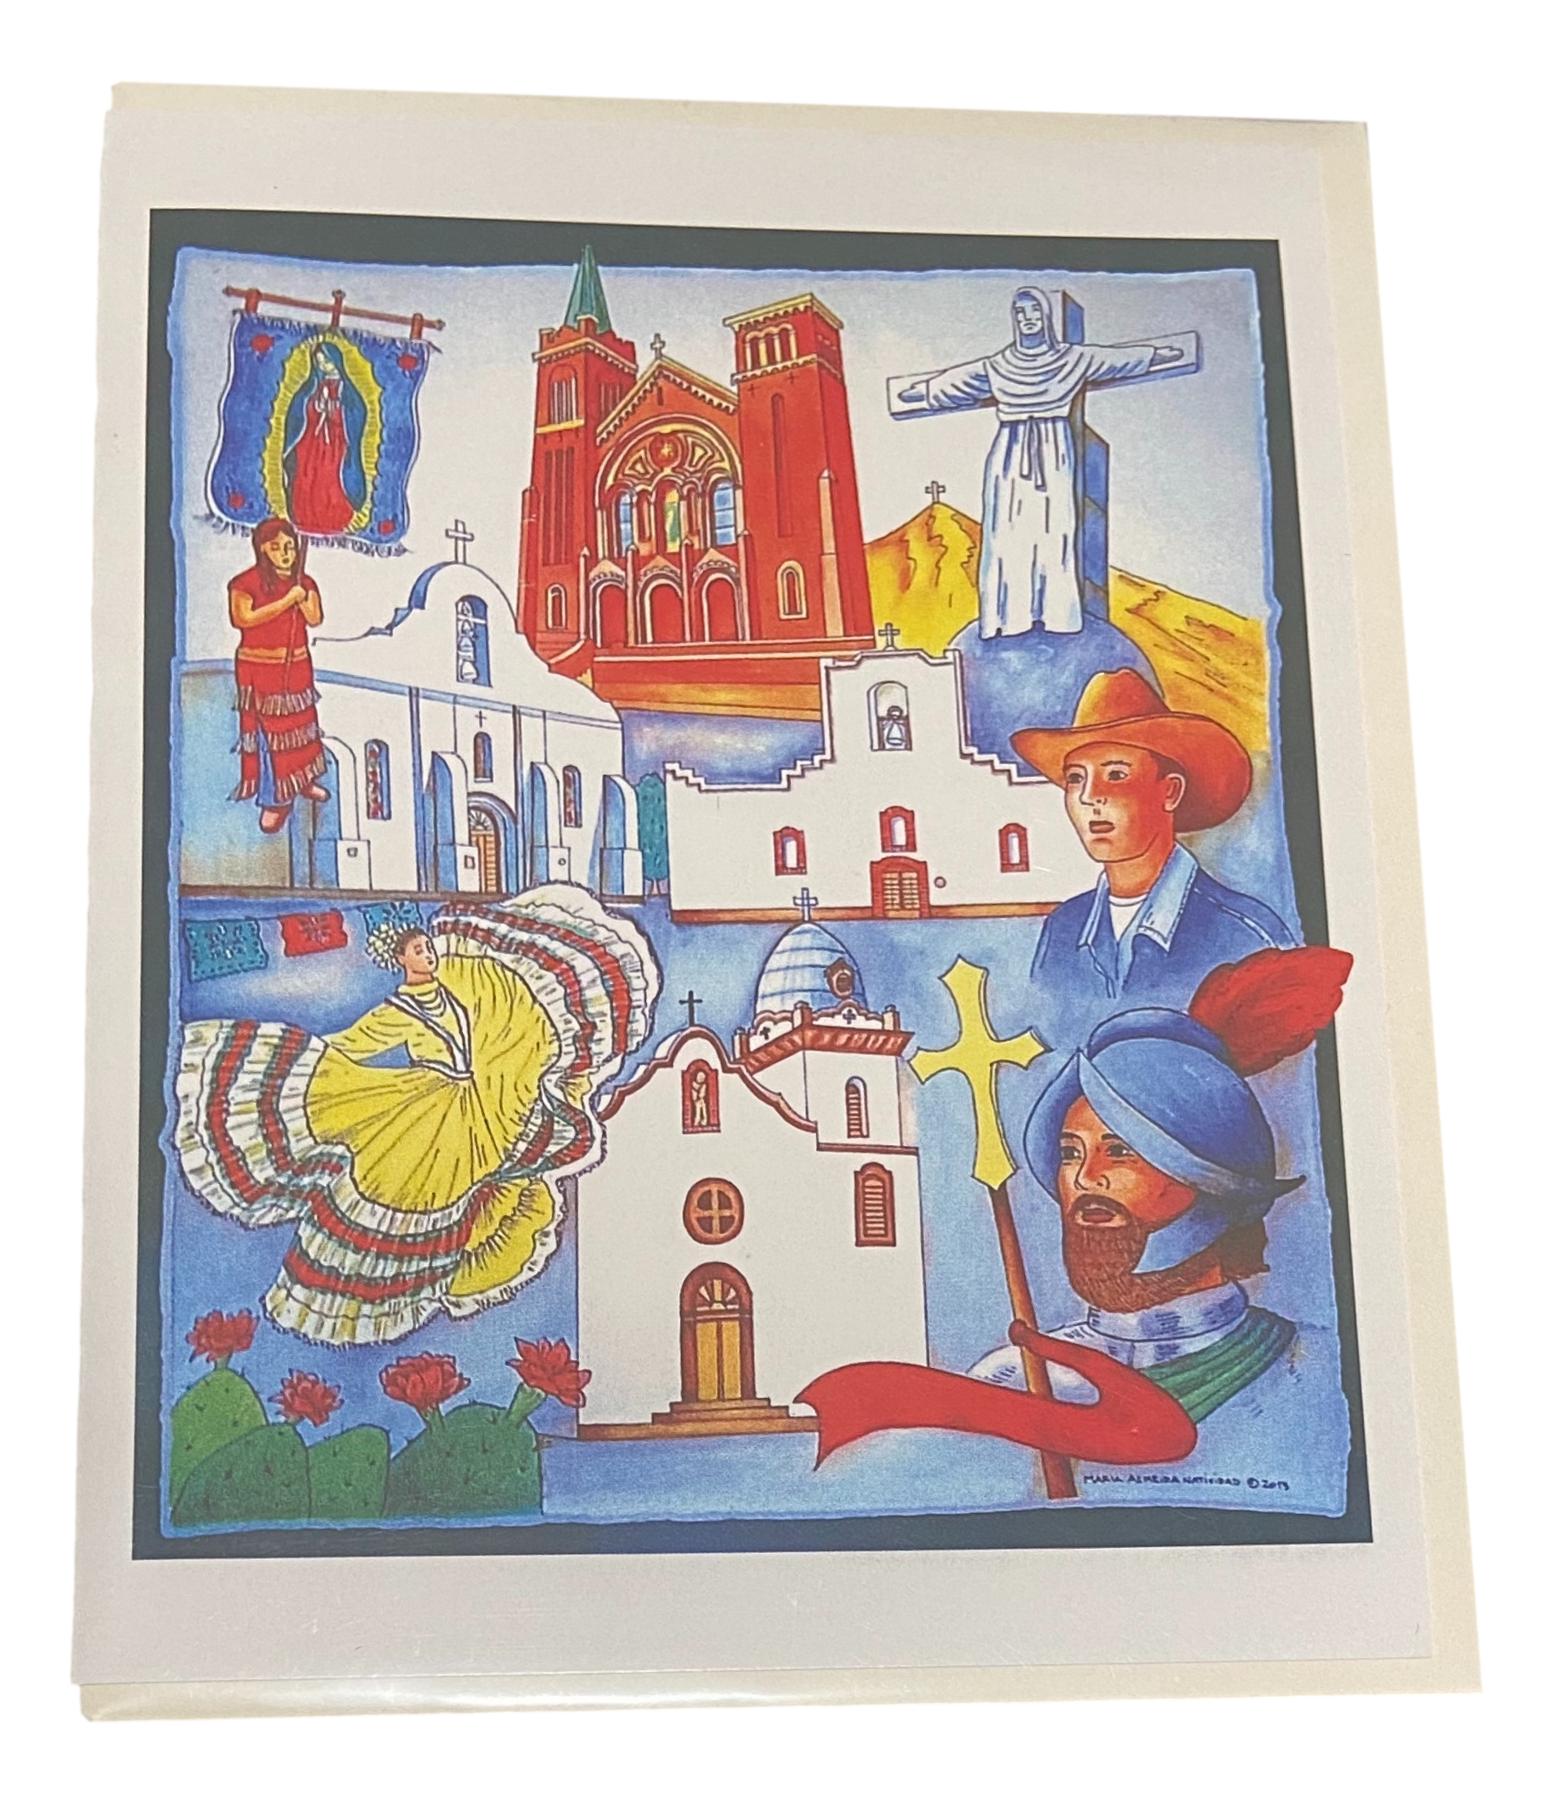 Note Card Souvenir El Paso Catholic Diocese 100th Celebration Poster Image 30" X 40" Handcrafted By Ysleta Mission Gift Shop - Ysleta Mission Gift Shop- VOTED El Paso's Best Gift Shop